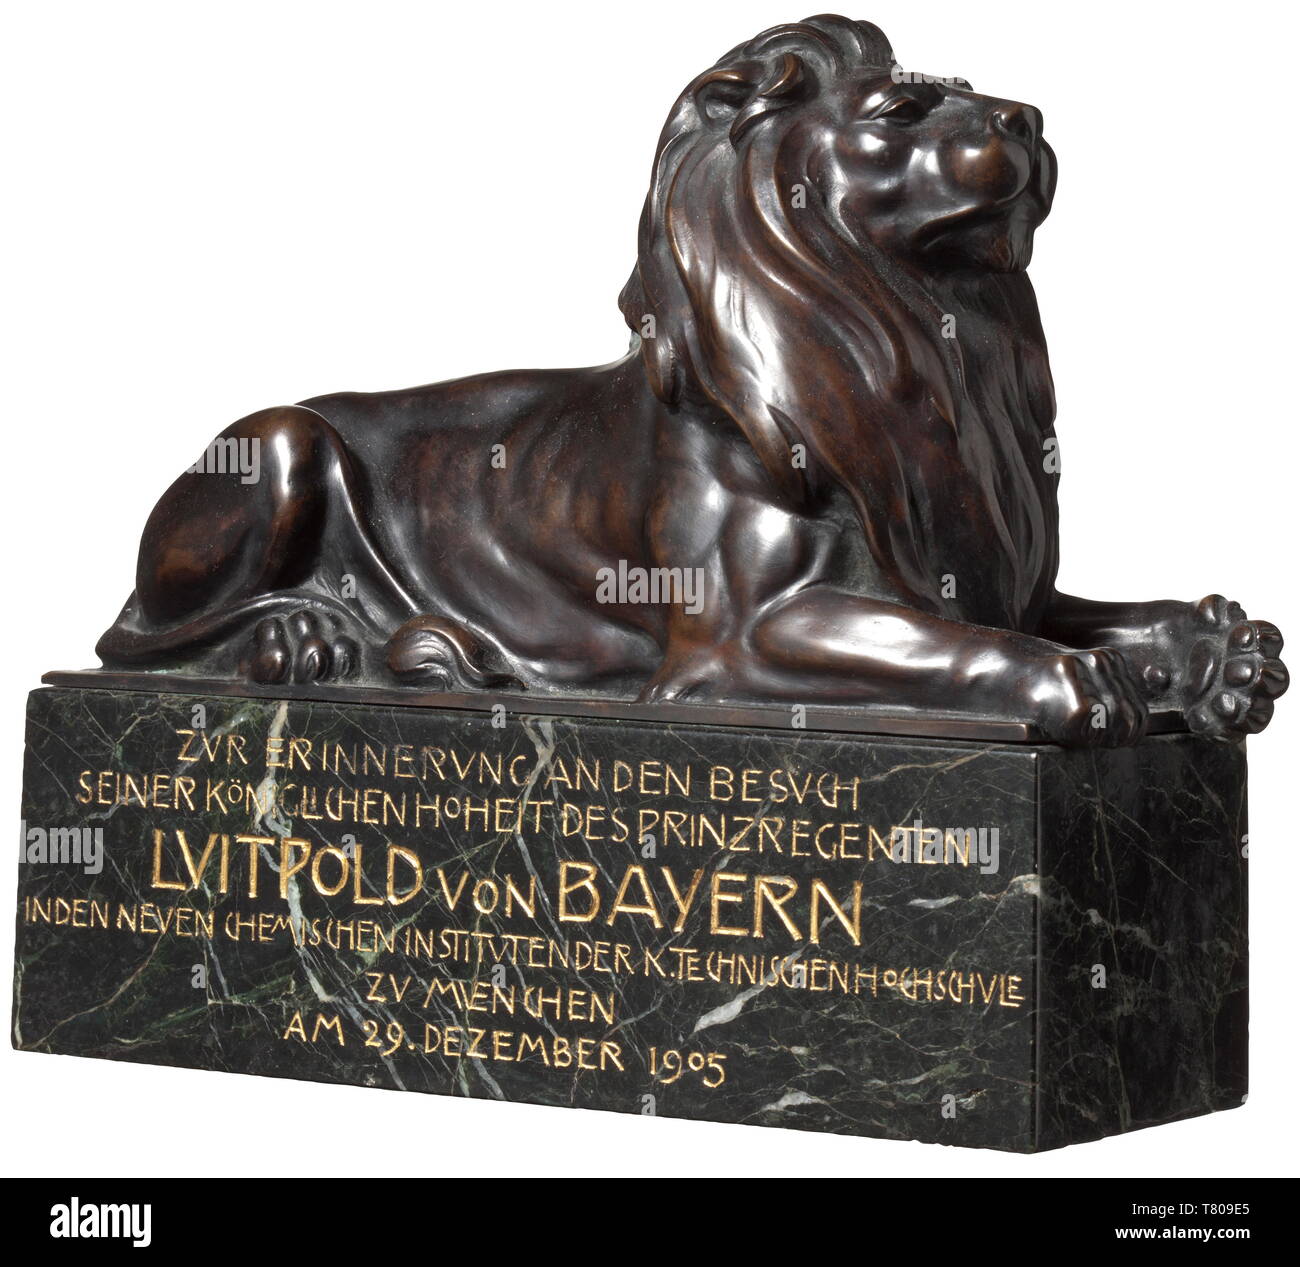 Prince Regent Luitpold of Bavaria (1821 - 1912) - a bronze lion. A reclining bronze lion on a marble base with inscription. The artist's signature on the plinth. With an inscription on the front commemorating a visit by the Prince Regent to the Munich Institute of Technology in 1905. Dimensions 20 x 17 x 7 cm. Georg Albertshofer (1864 - 1933) was a professor at the Munich Academy and created famous sculptures and statues. The bronze figure was a gift to the Bavarian royal house. Direct from the possessions of the Bavarian ruling family. historic,, Additional-Rights-Clearance-Info-Not-Available Stock Photo